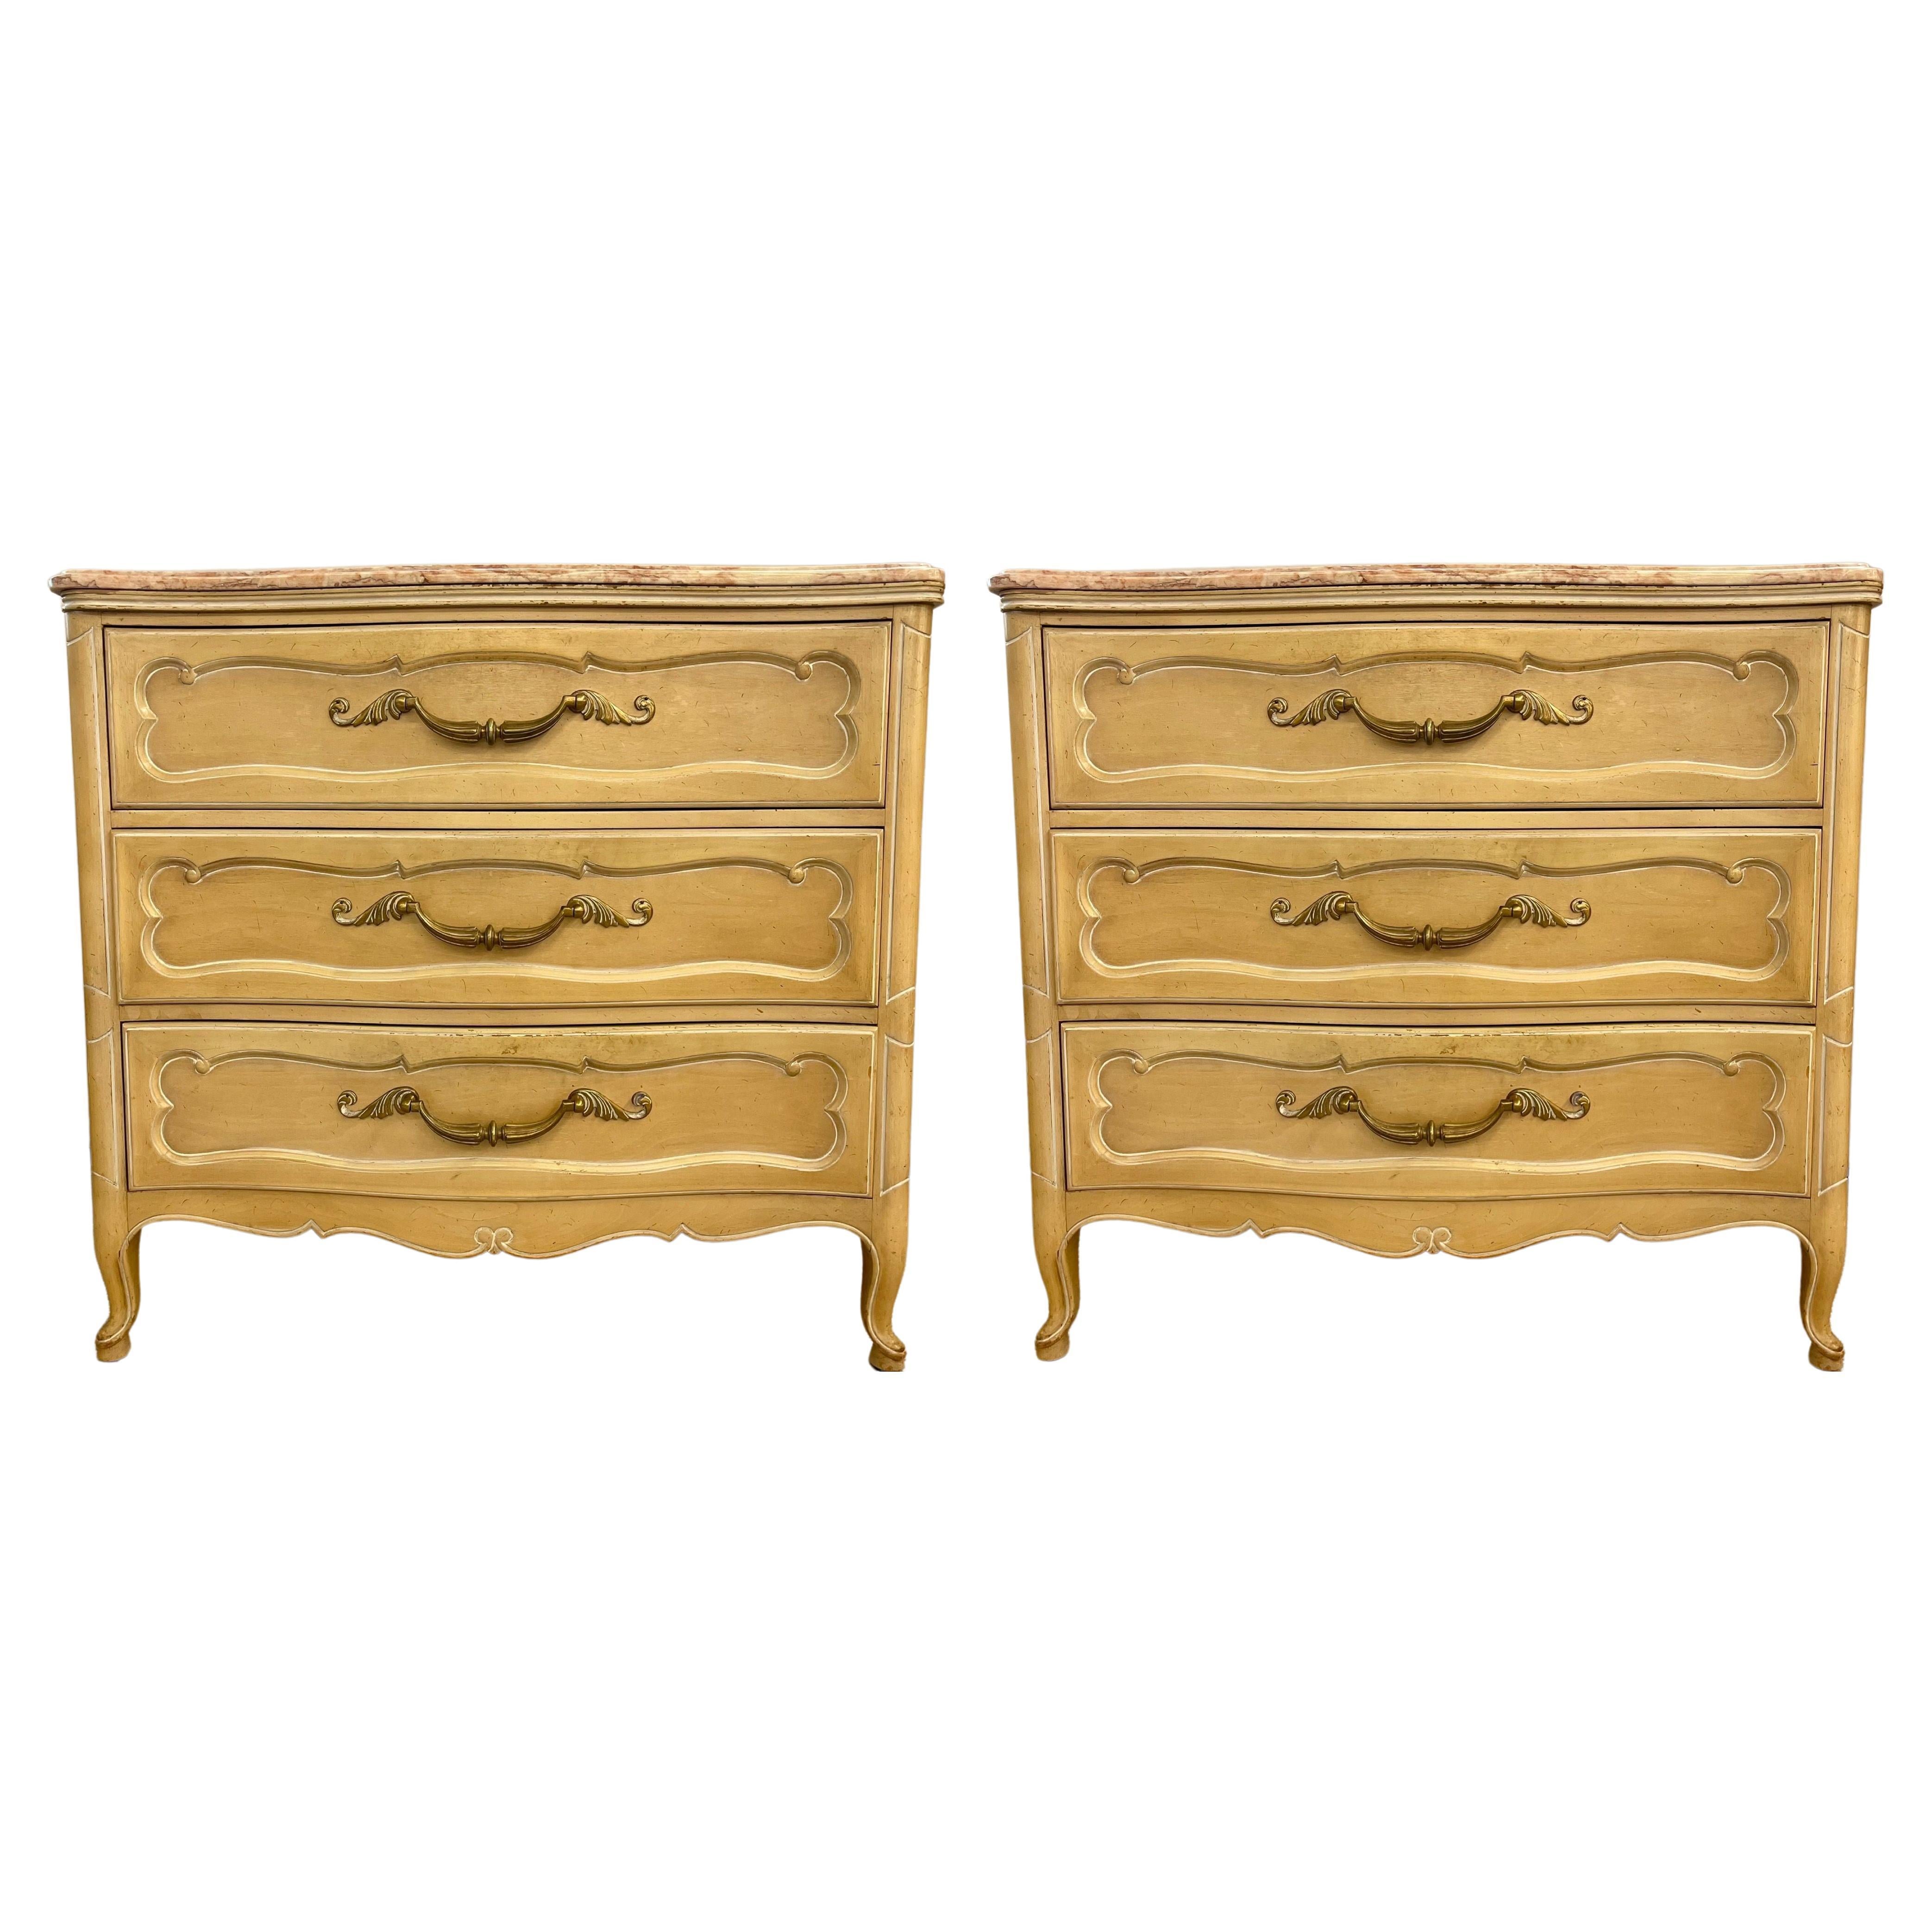 Pair Of Louis XV Style Grosfeld House Marble-Top Distressed Four-Drawer Commodes